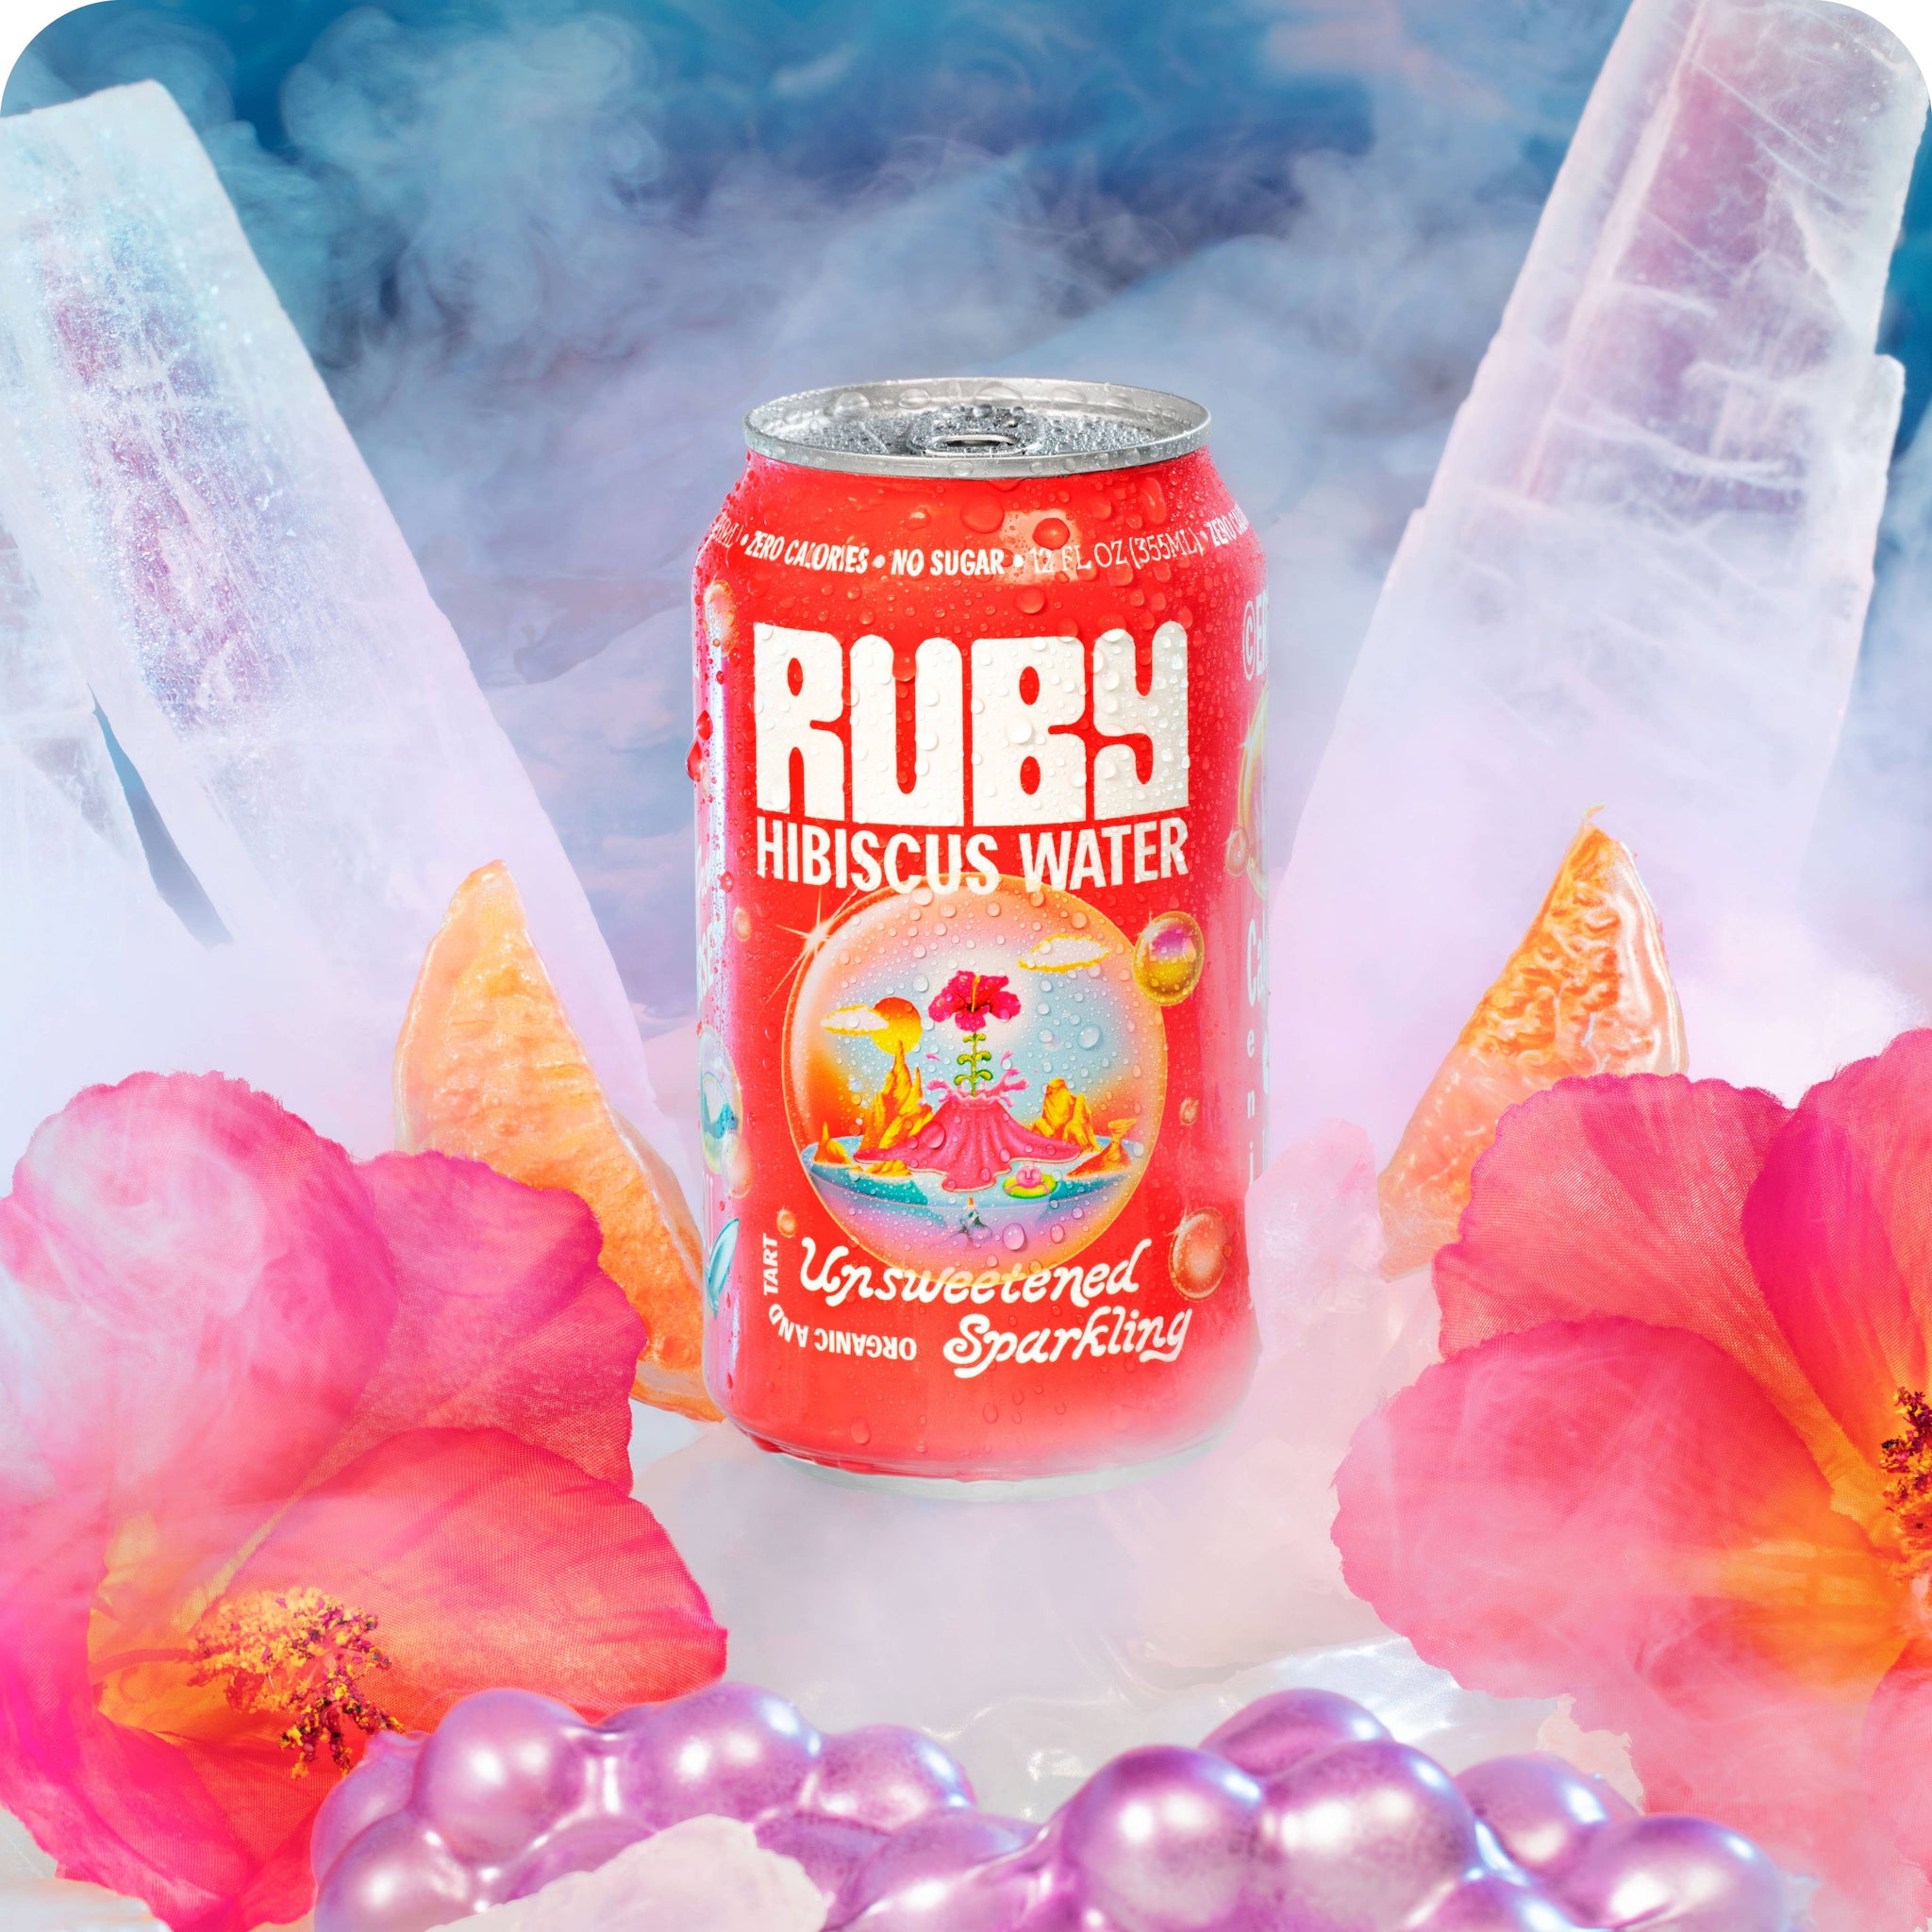 Unsweetened Sparkling Ruby Hibiscus